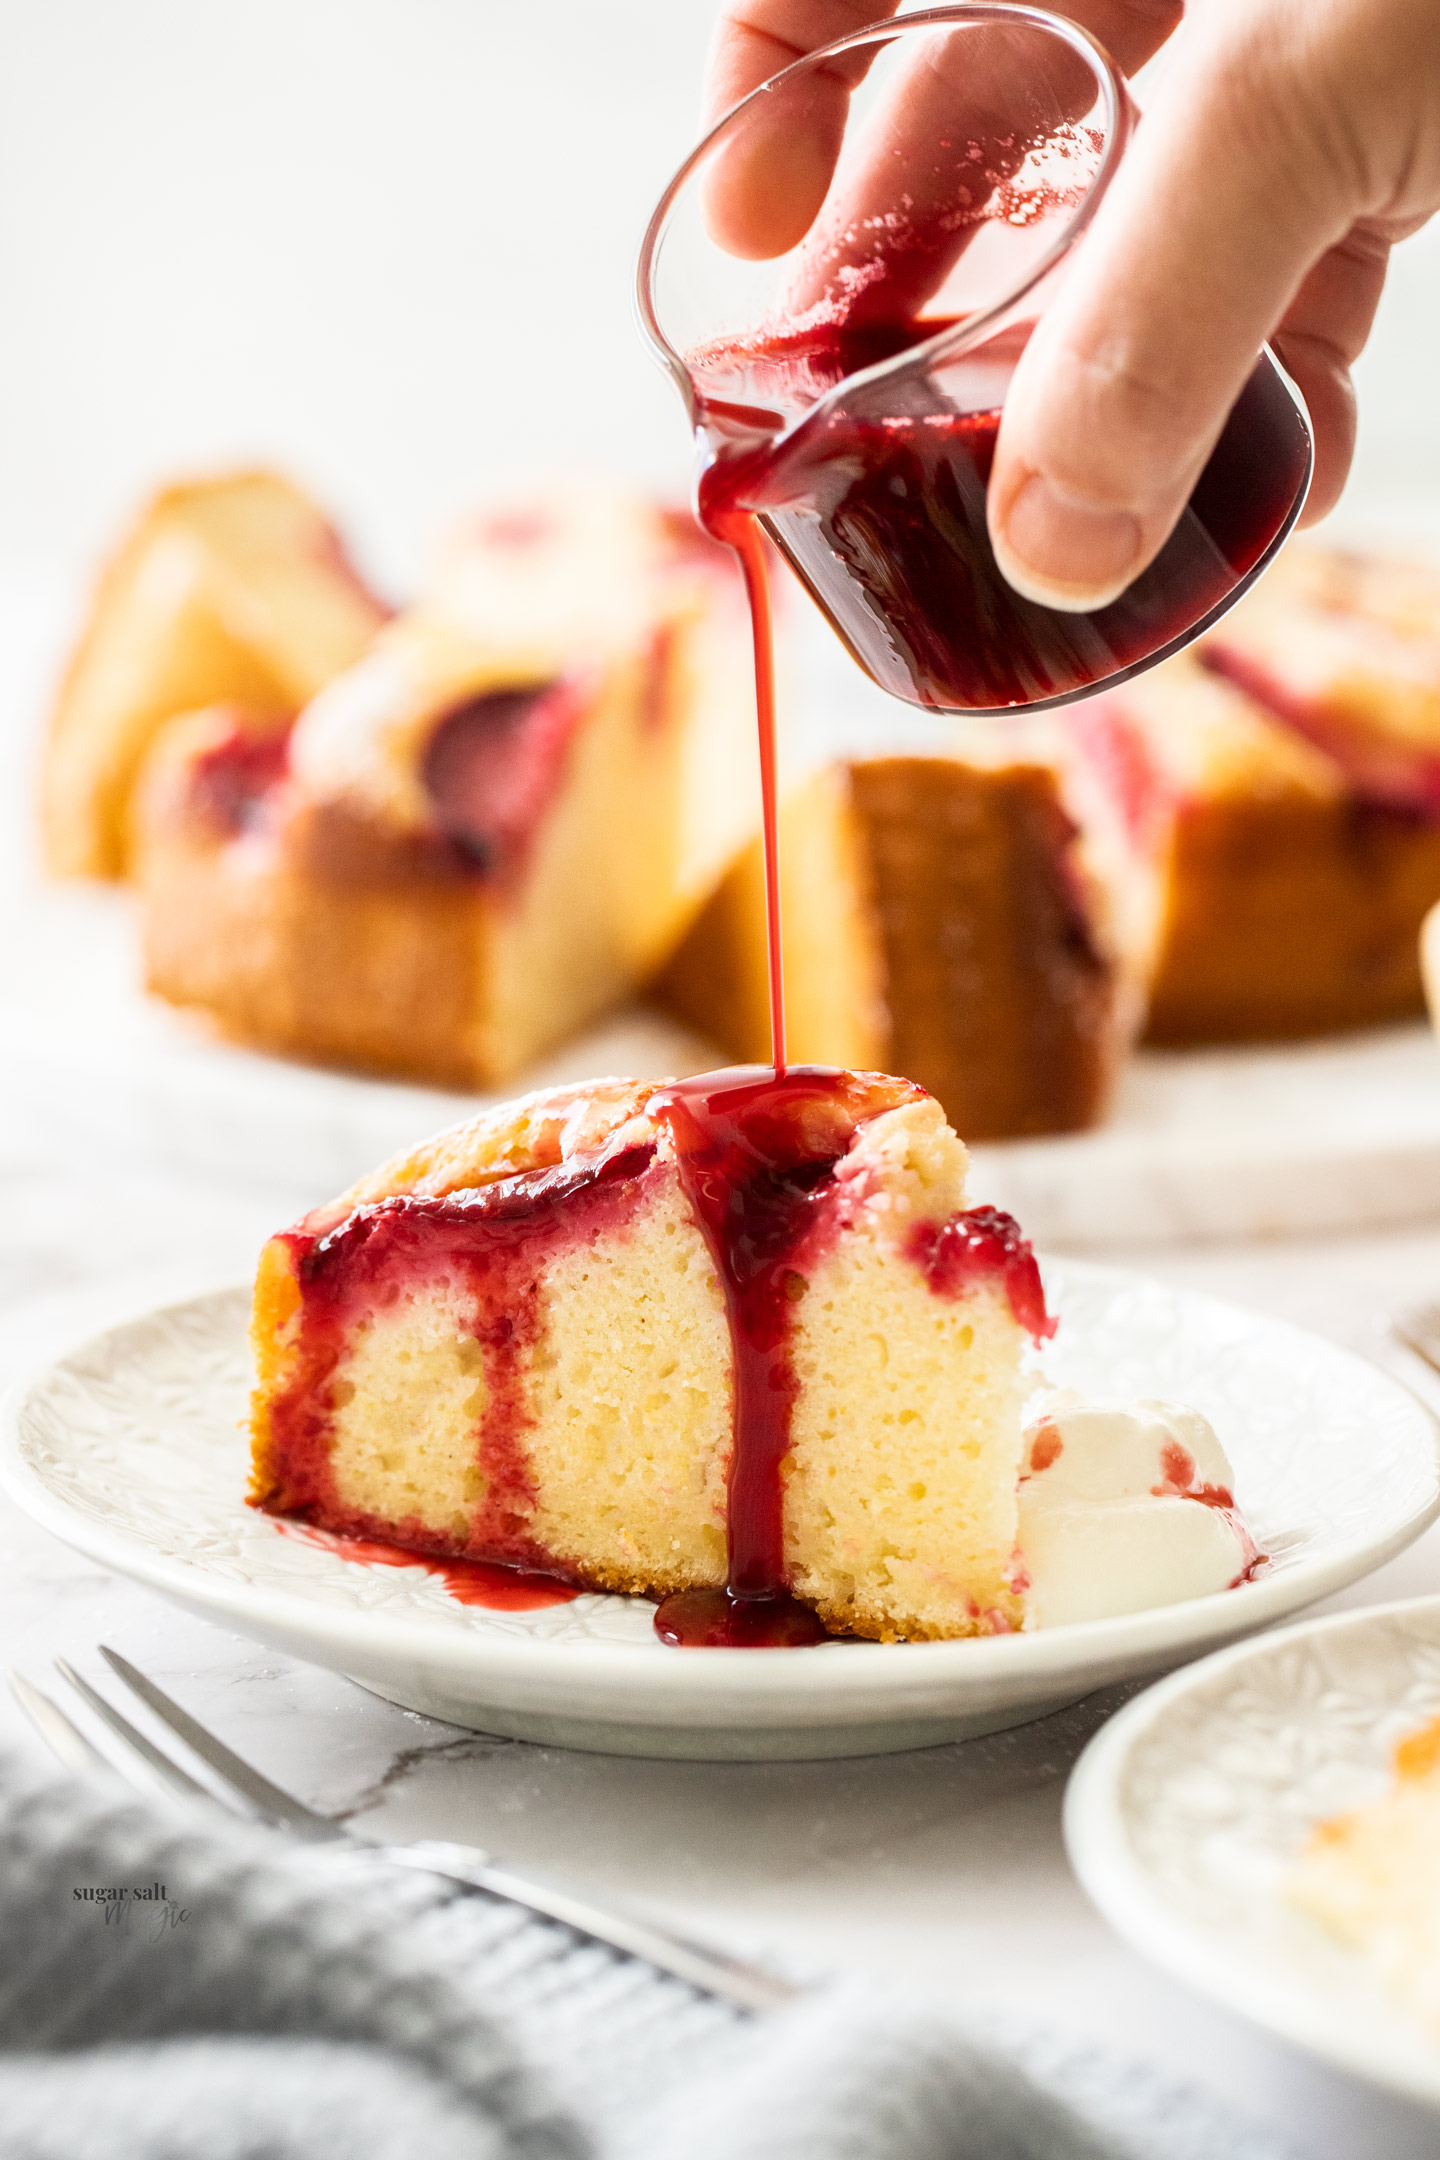 Syrup being poured over a slice of cake.